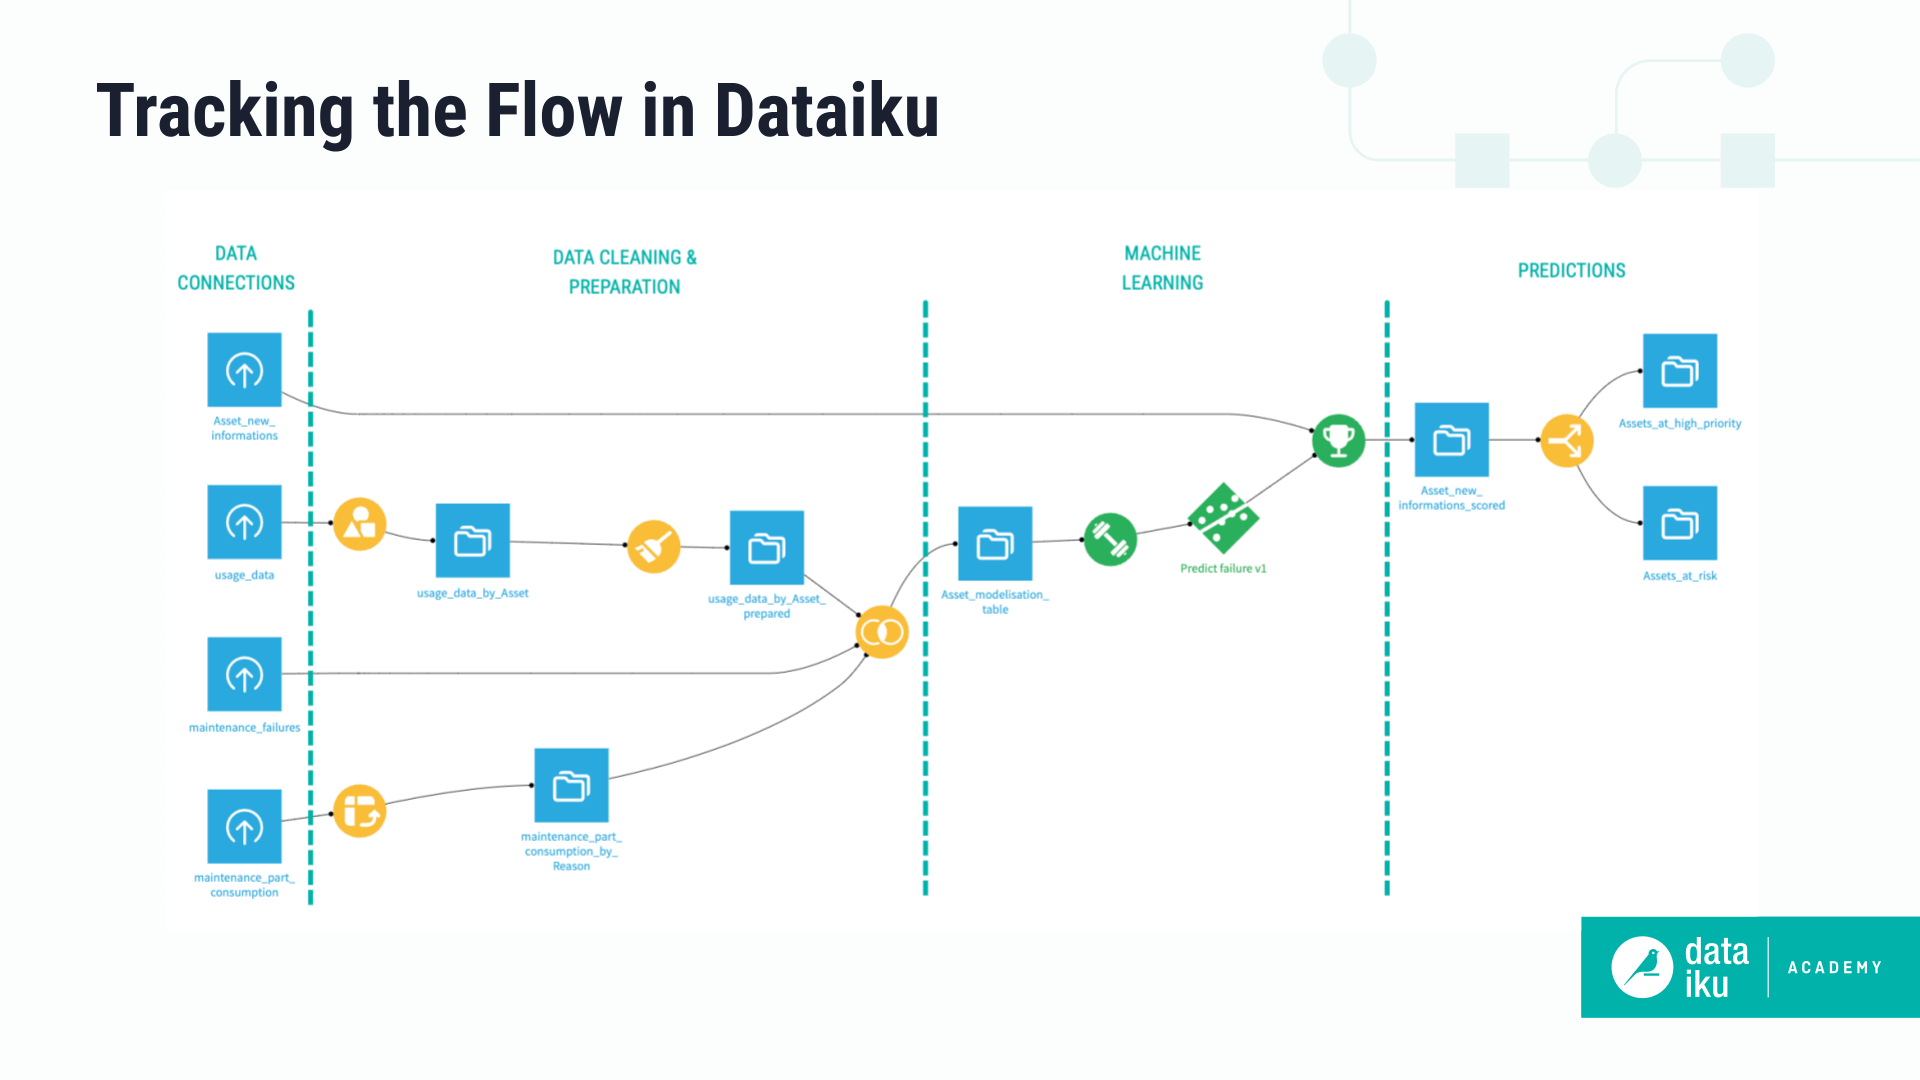 The Flow tracks all your datasets, recipes, and machine learning models in Dataiku.